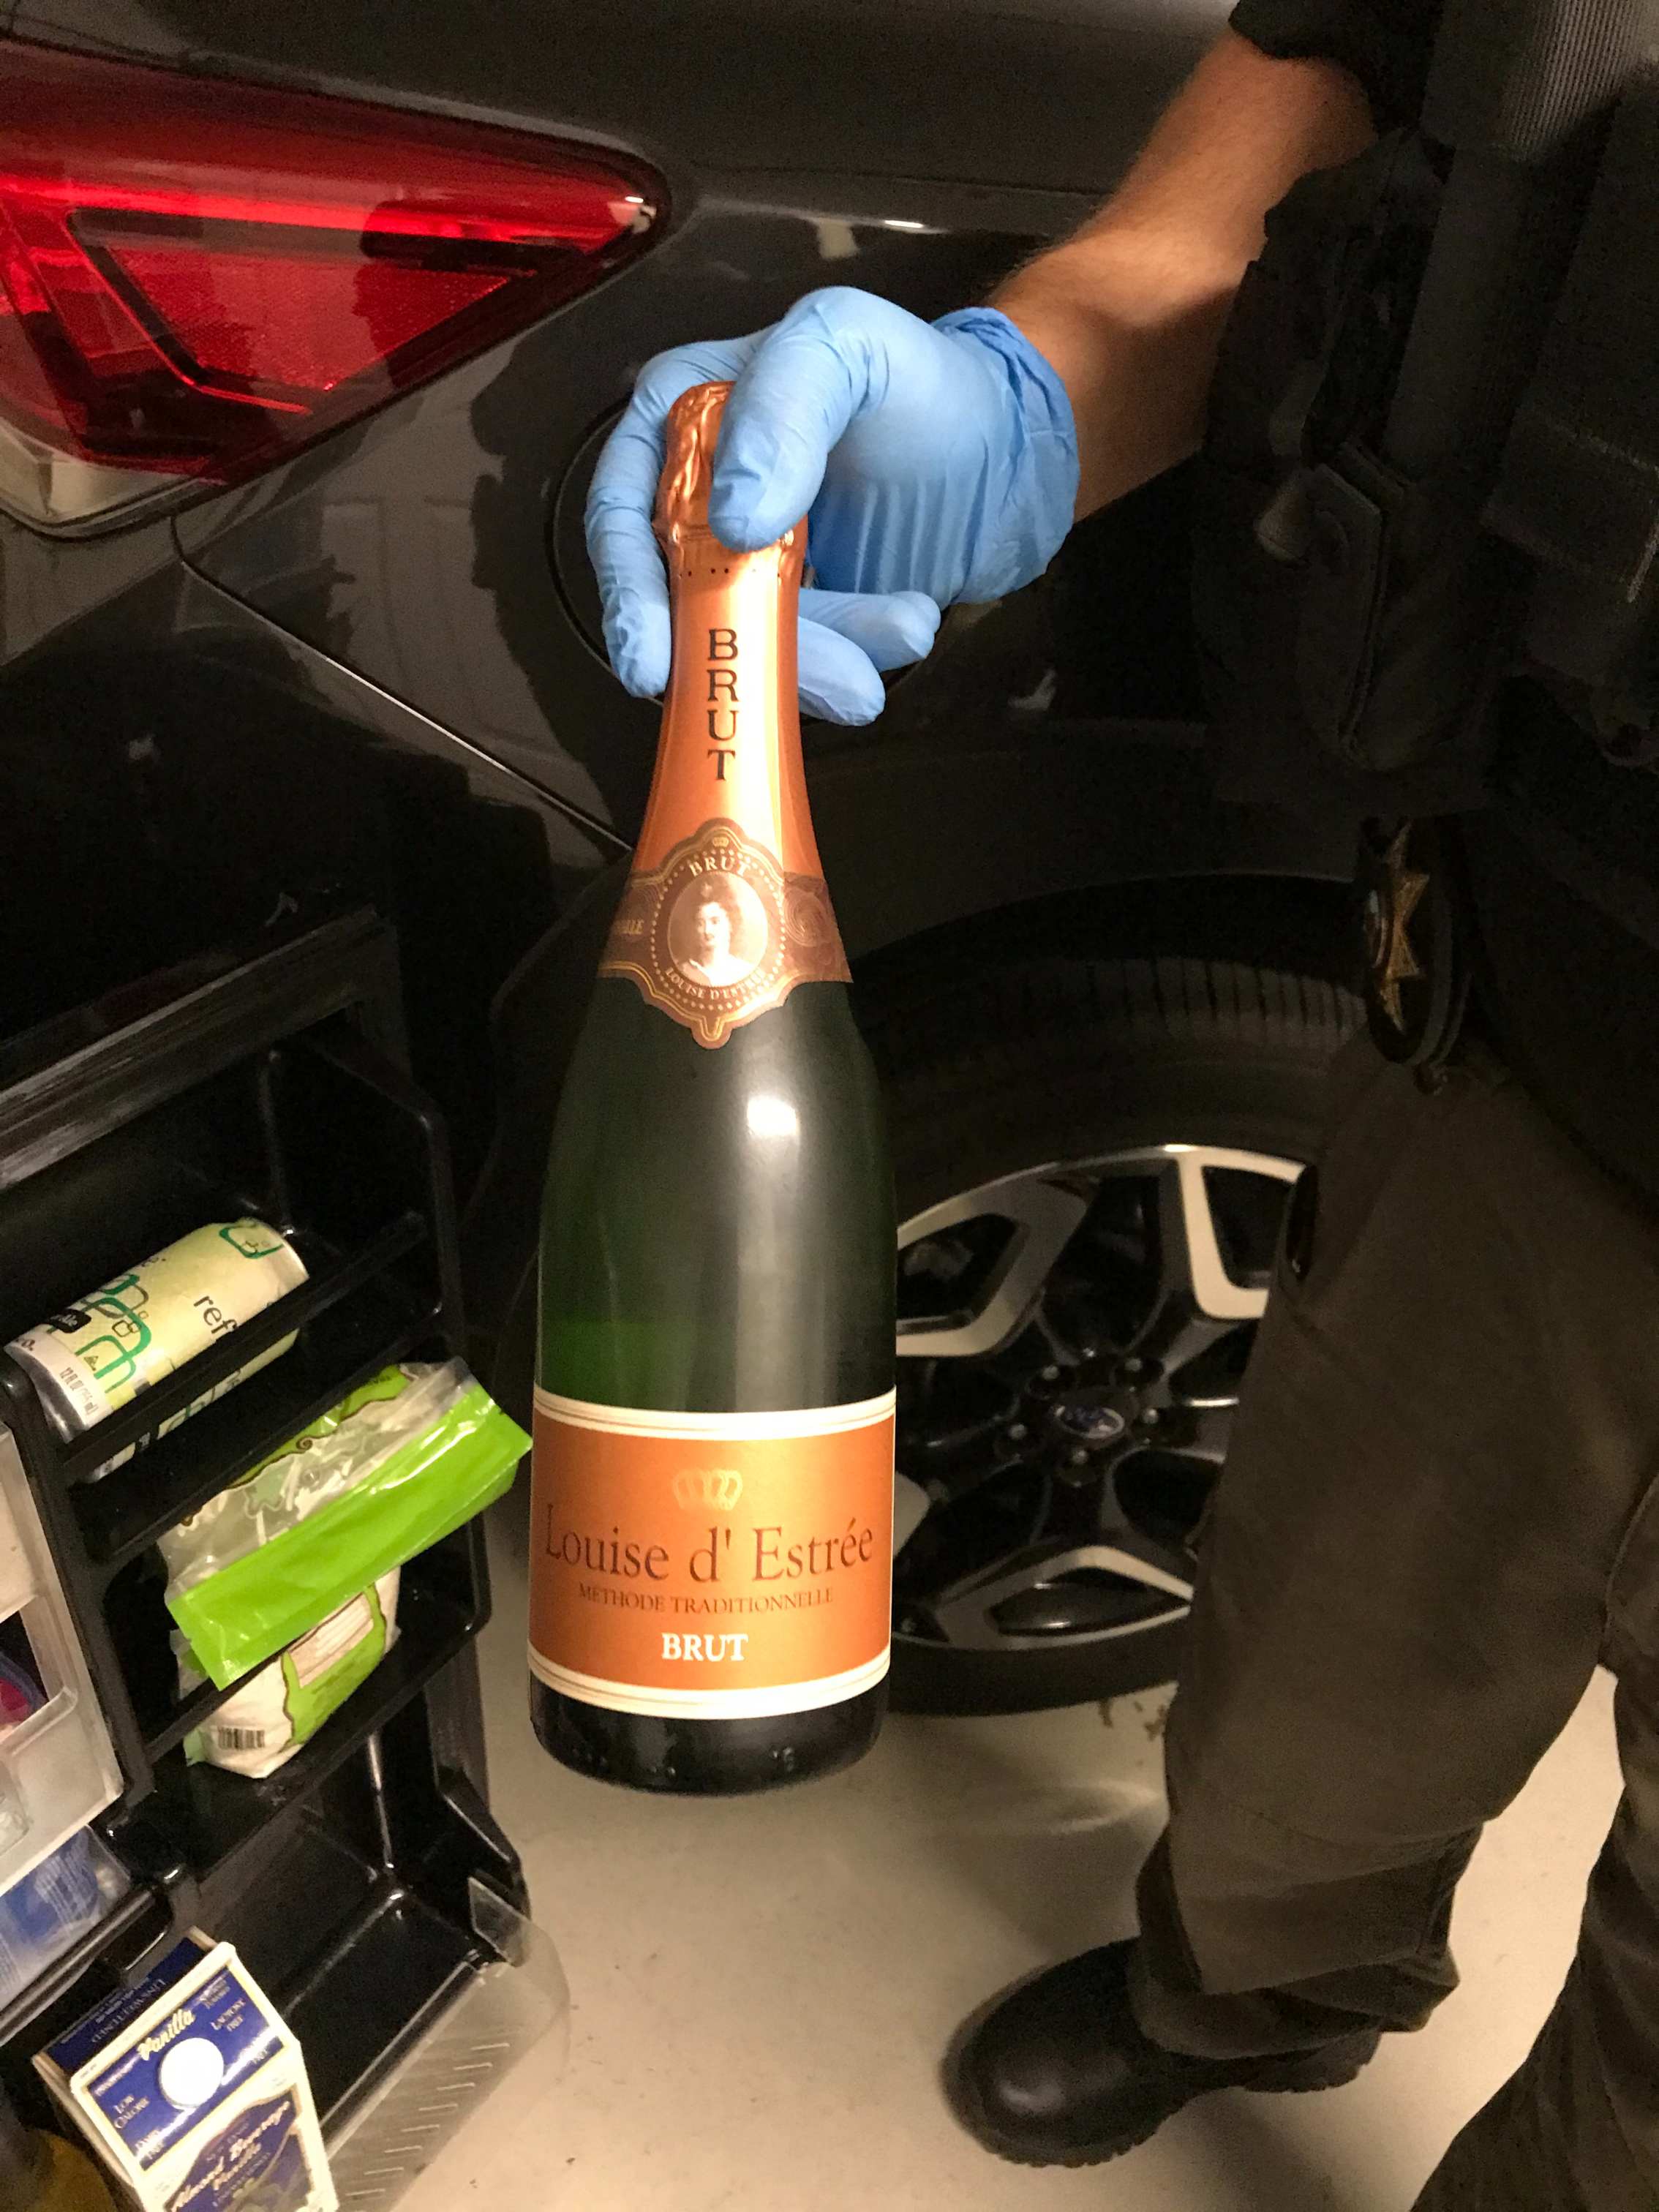 The gloved hand of a probation officer holds up a bottle of sparkling wine confiscated during a DUI compliance check.